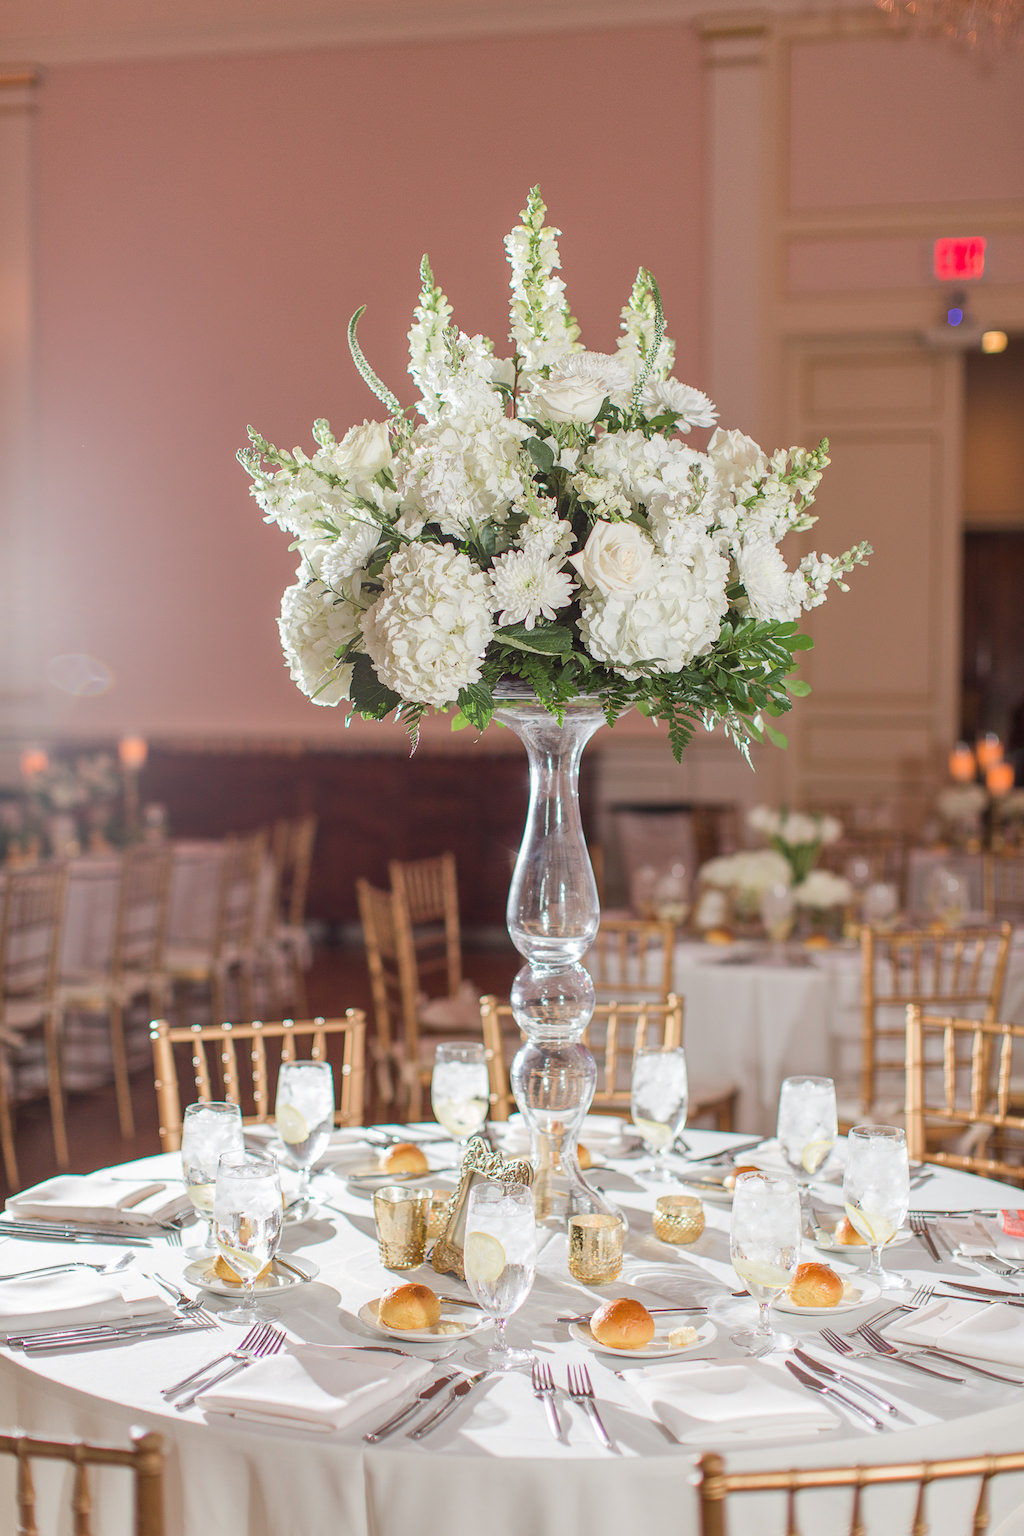 Classic, Romantic, Elegant Timeless Ballroom Wedding Reception Decor, Round Tables with White Linens, Gold Chiavari Chairs, Tall White Hydrangeas, Roses and Snapdragon Floral Centerpiece on Tall Glass Skinny Vase | St. Petersburg Wedding Venue Museum of Fine Arts | Wedding Rentals Olympia Catering